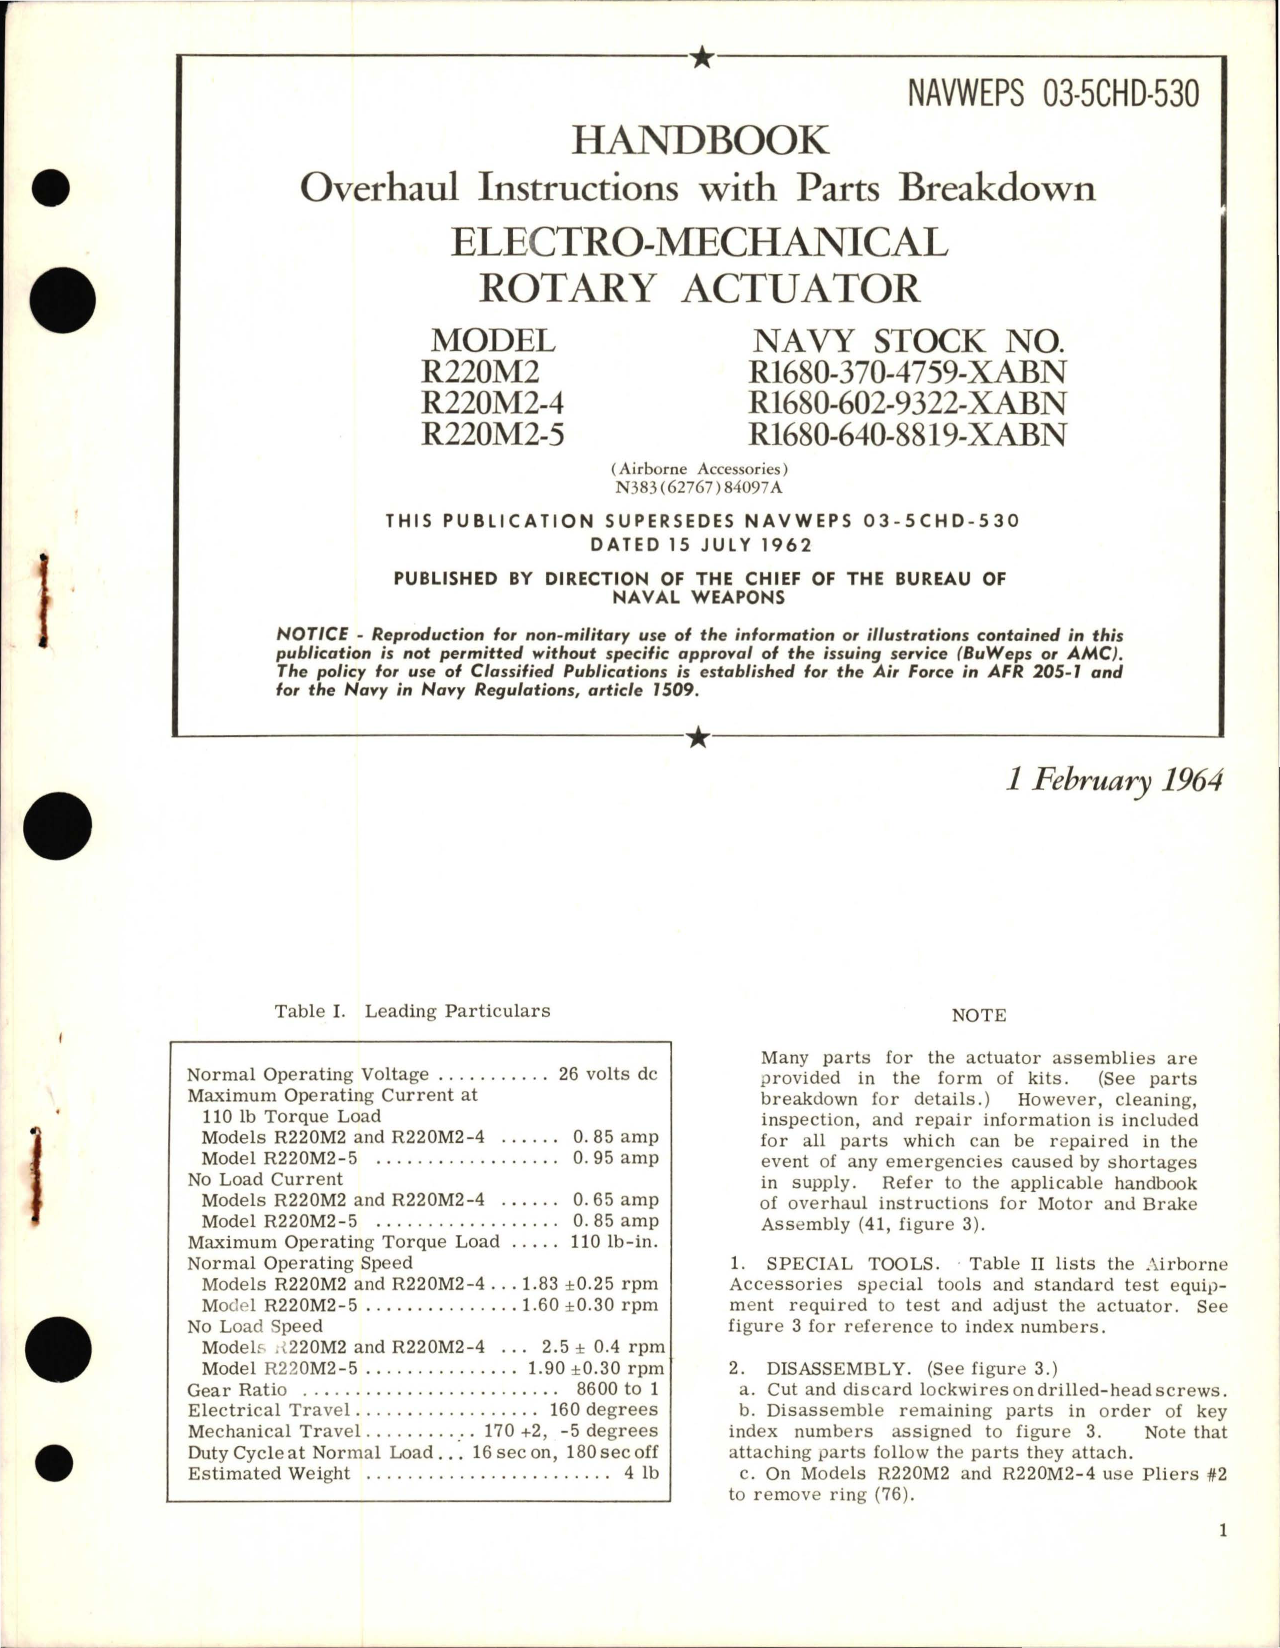 Sample page 1 from AirCorps Library document: Overhaul Instruments with Parts Breakdown for Electro-Mechanical Rotary Actuator Models R220M2, R220M2-4, and R220M2-5  